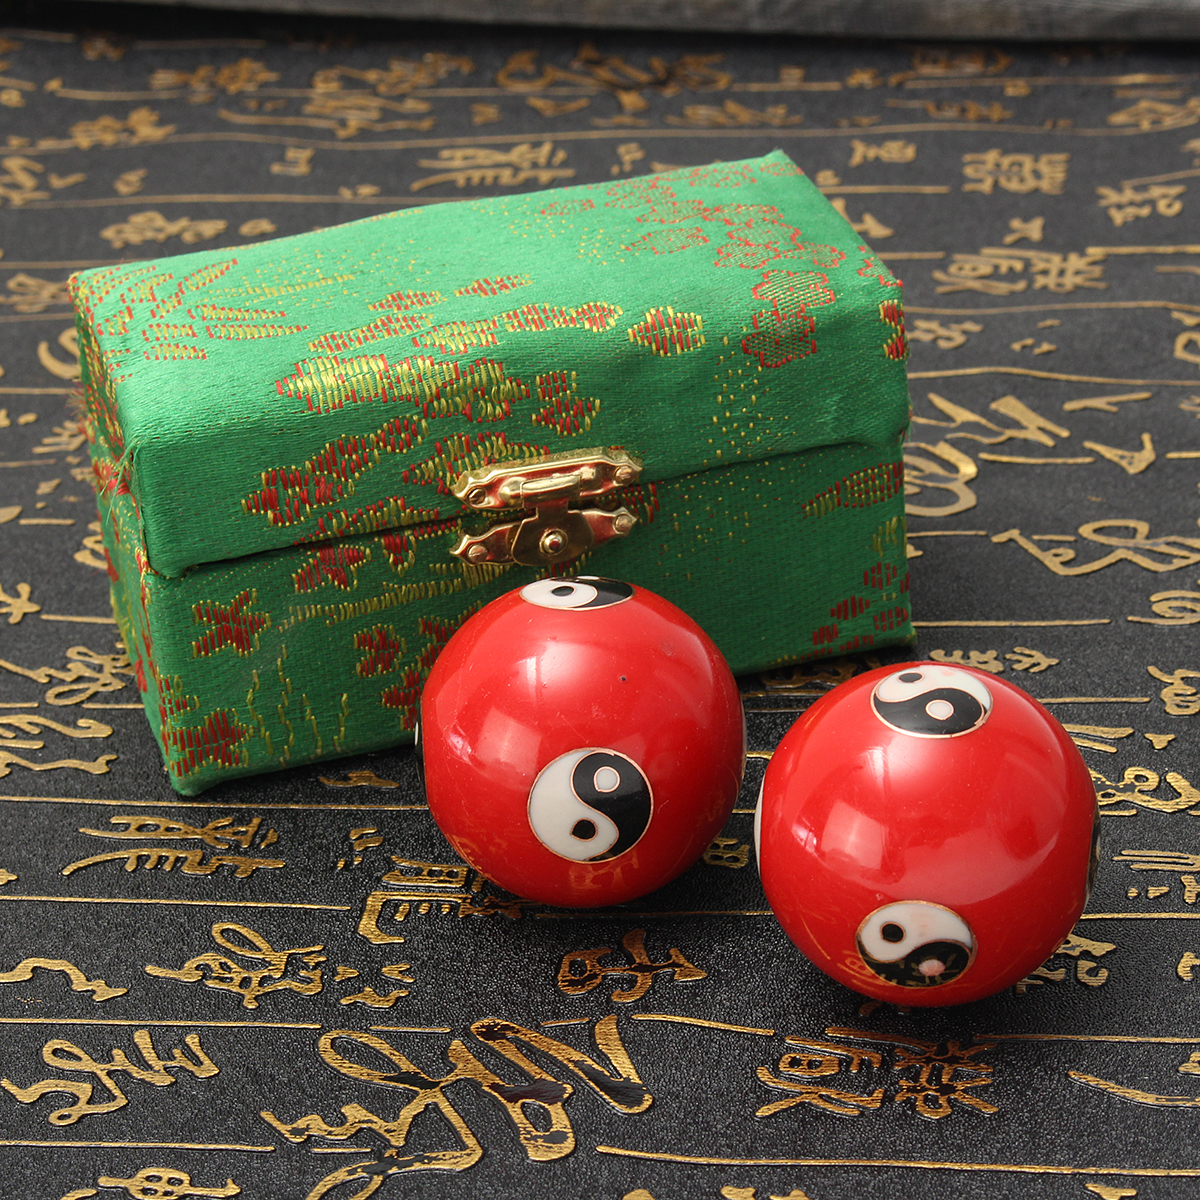 2pcs-42mm-Chinese-Health-Yin-Yang-Therapy-Tools-Exercise-Stress-Relaxation-Massage-Baoding-Ball-1125303